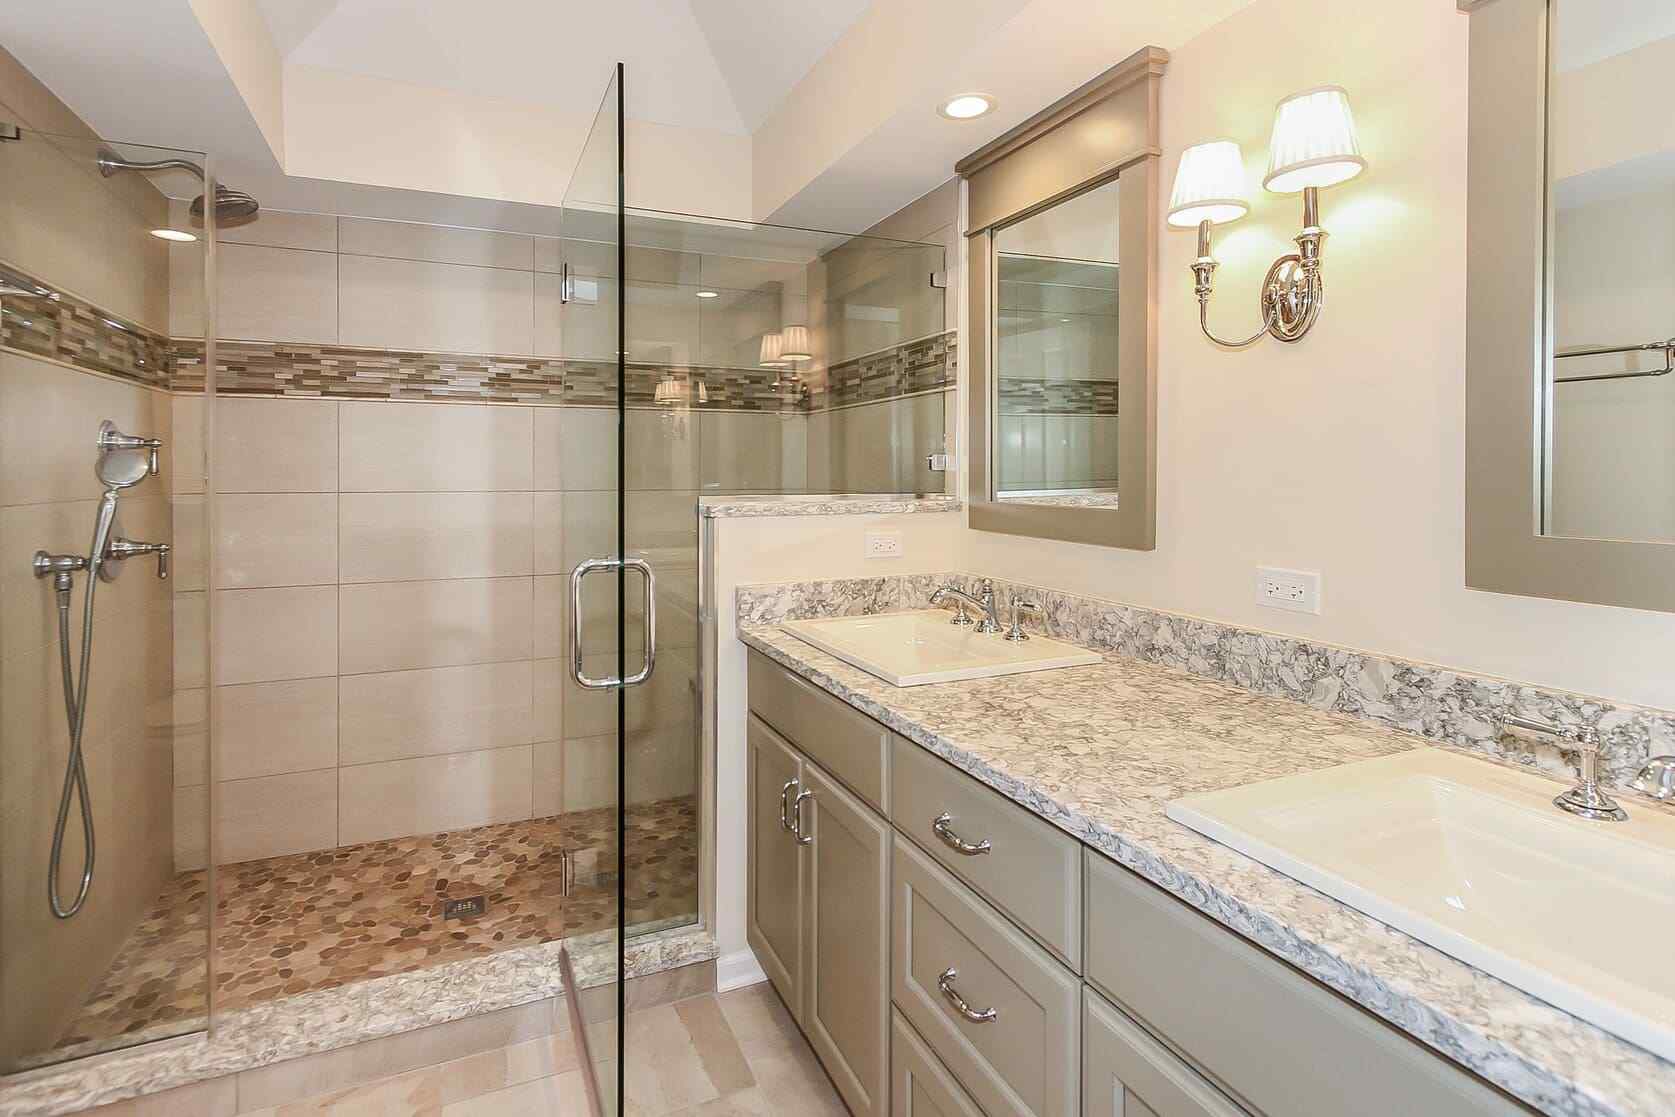 Northwest Chicago Bathroom Remodel Costs by Scale